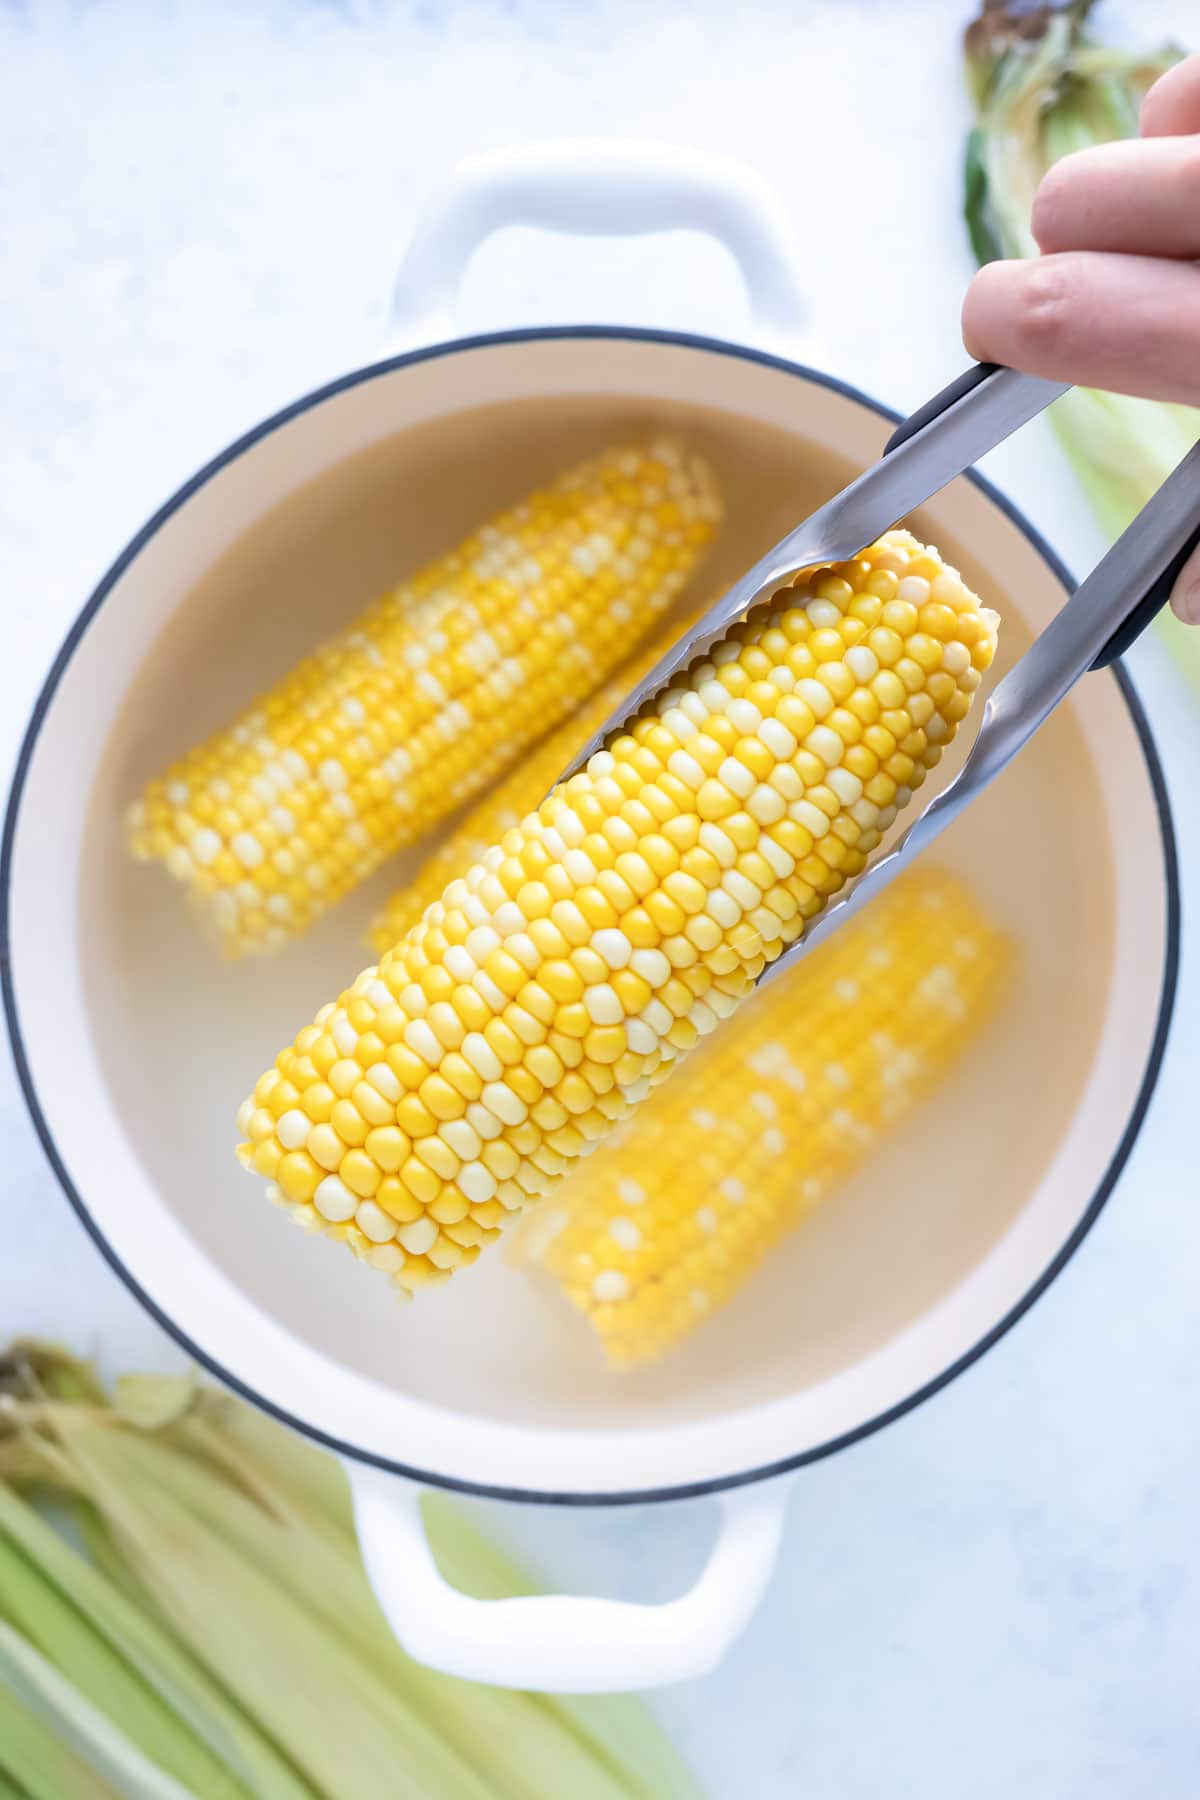 Tongs are used to remove the corn from the water.